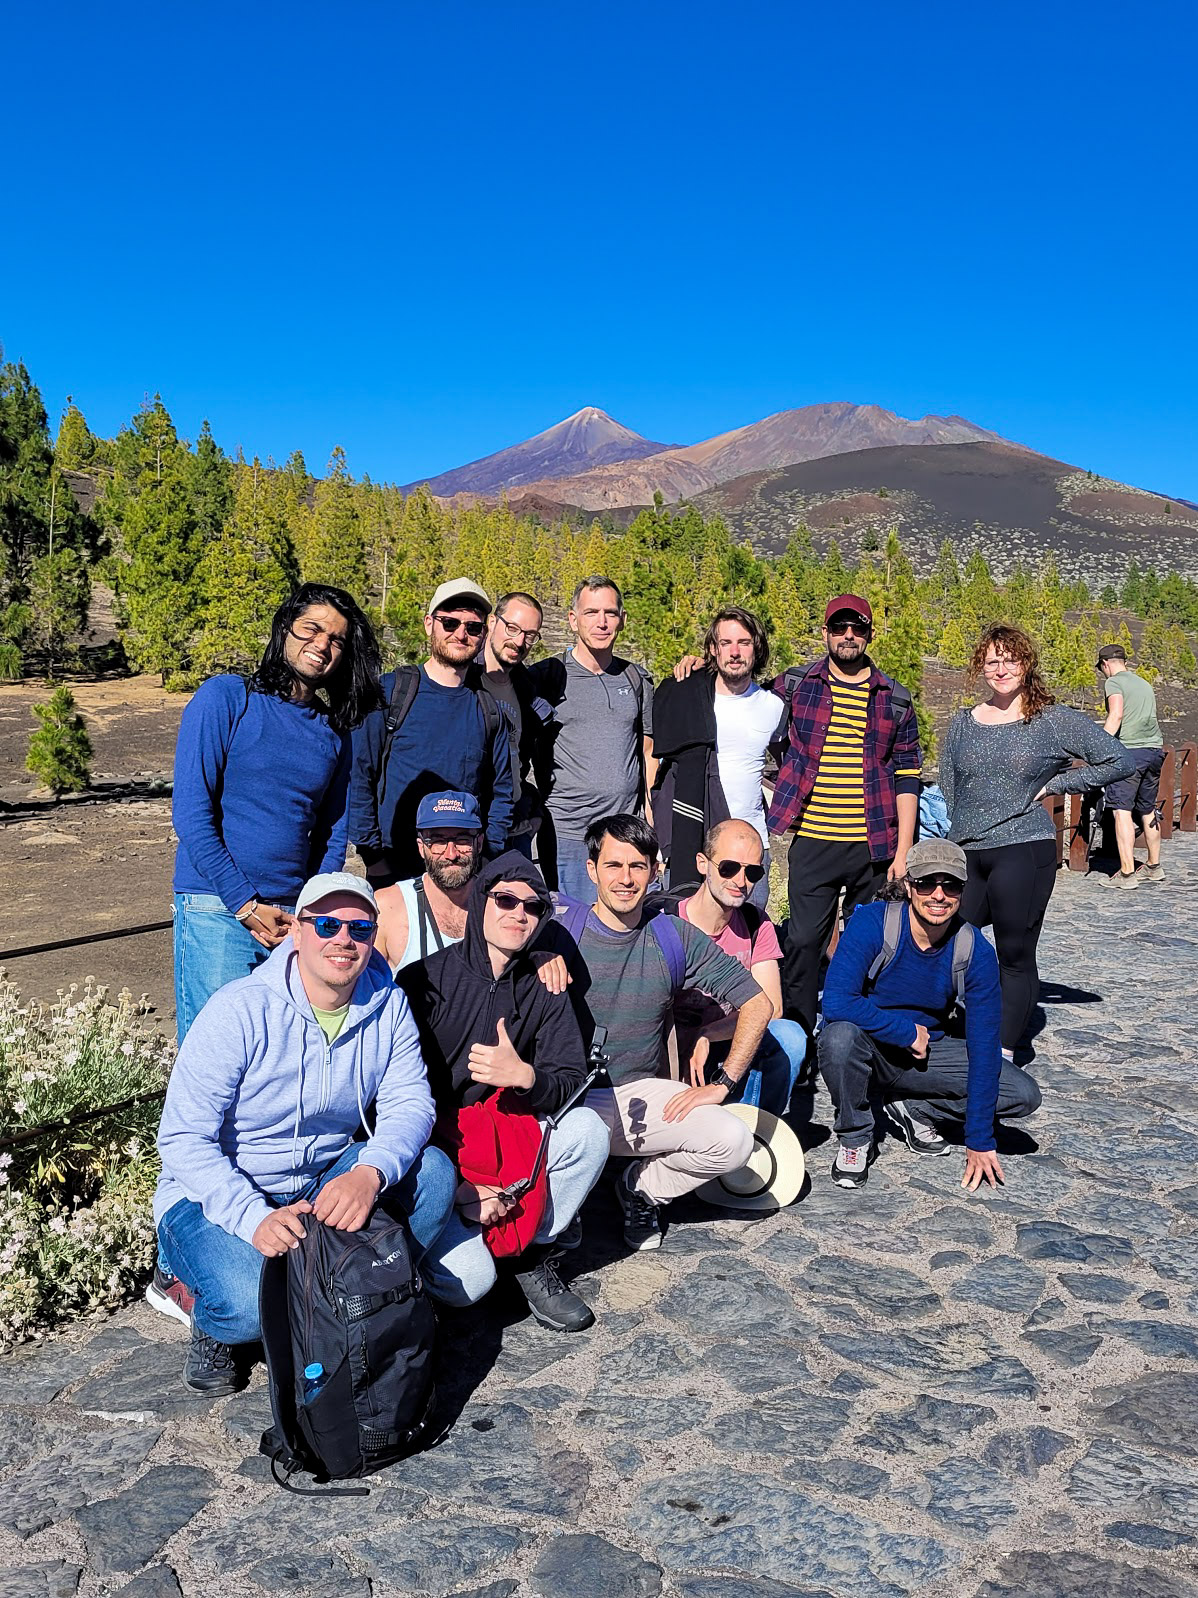 A group photo of the MUI crew posing near the base of Mount Teide at the start of the hike.